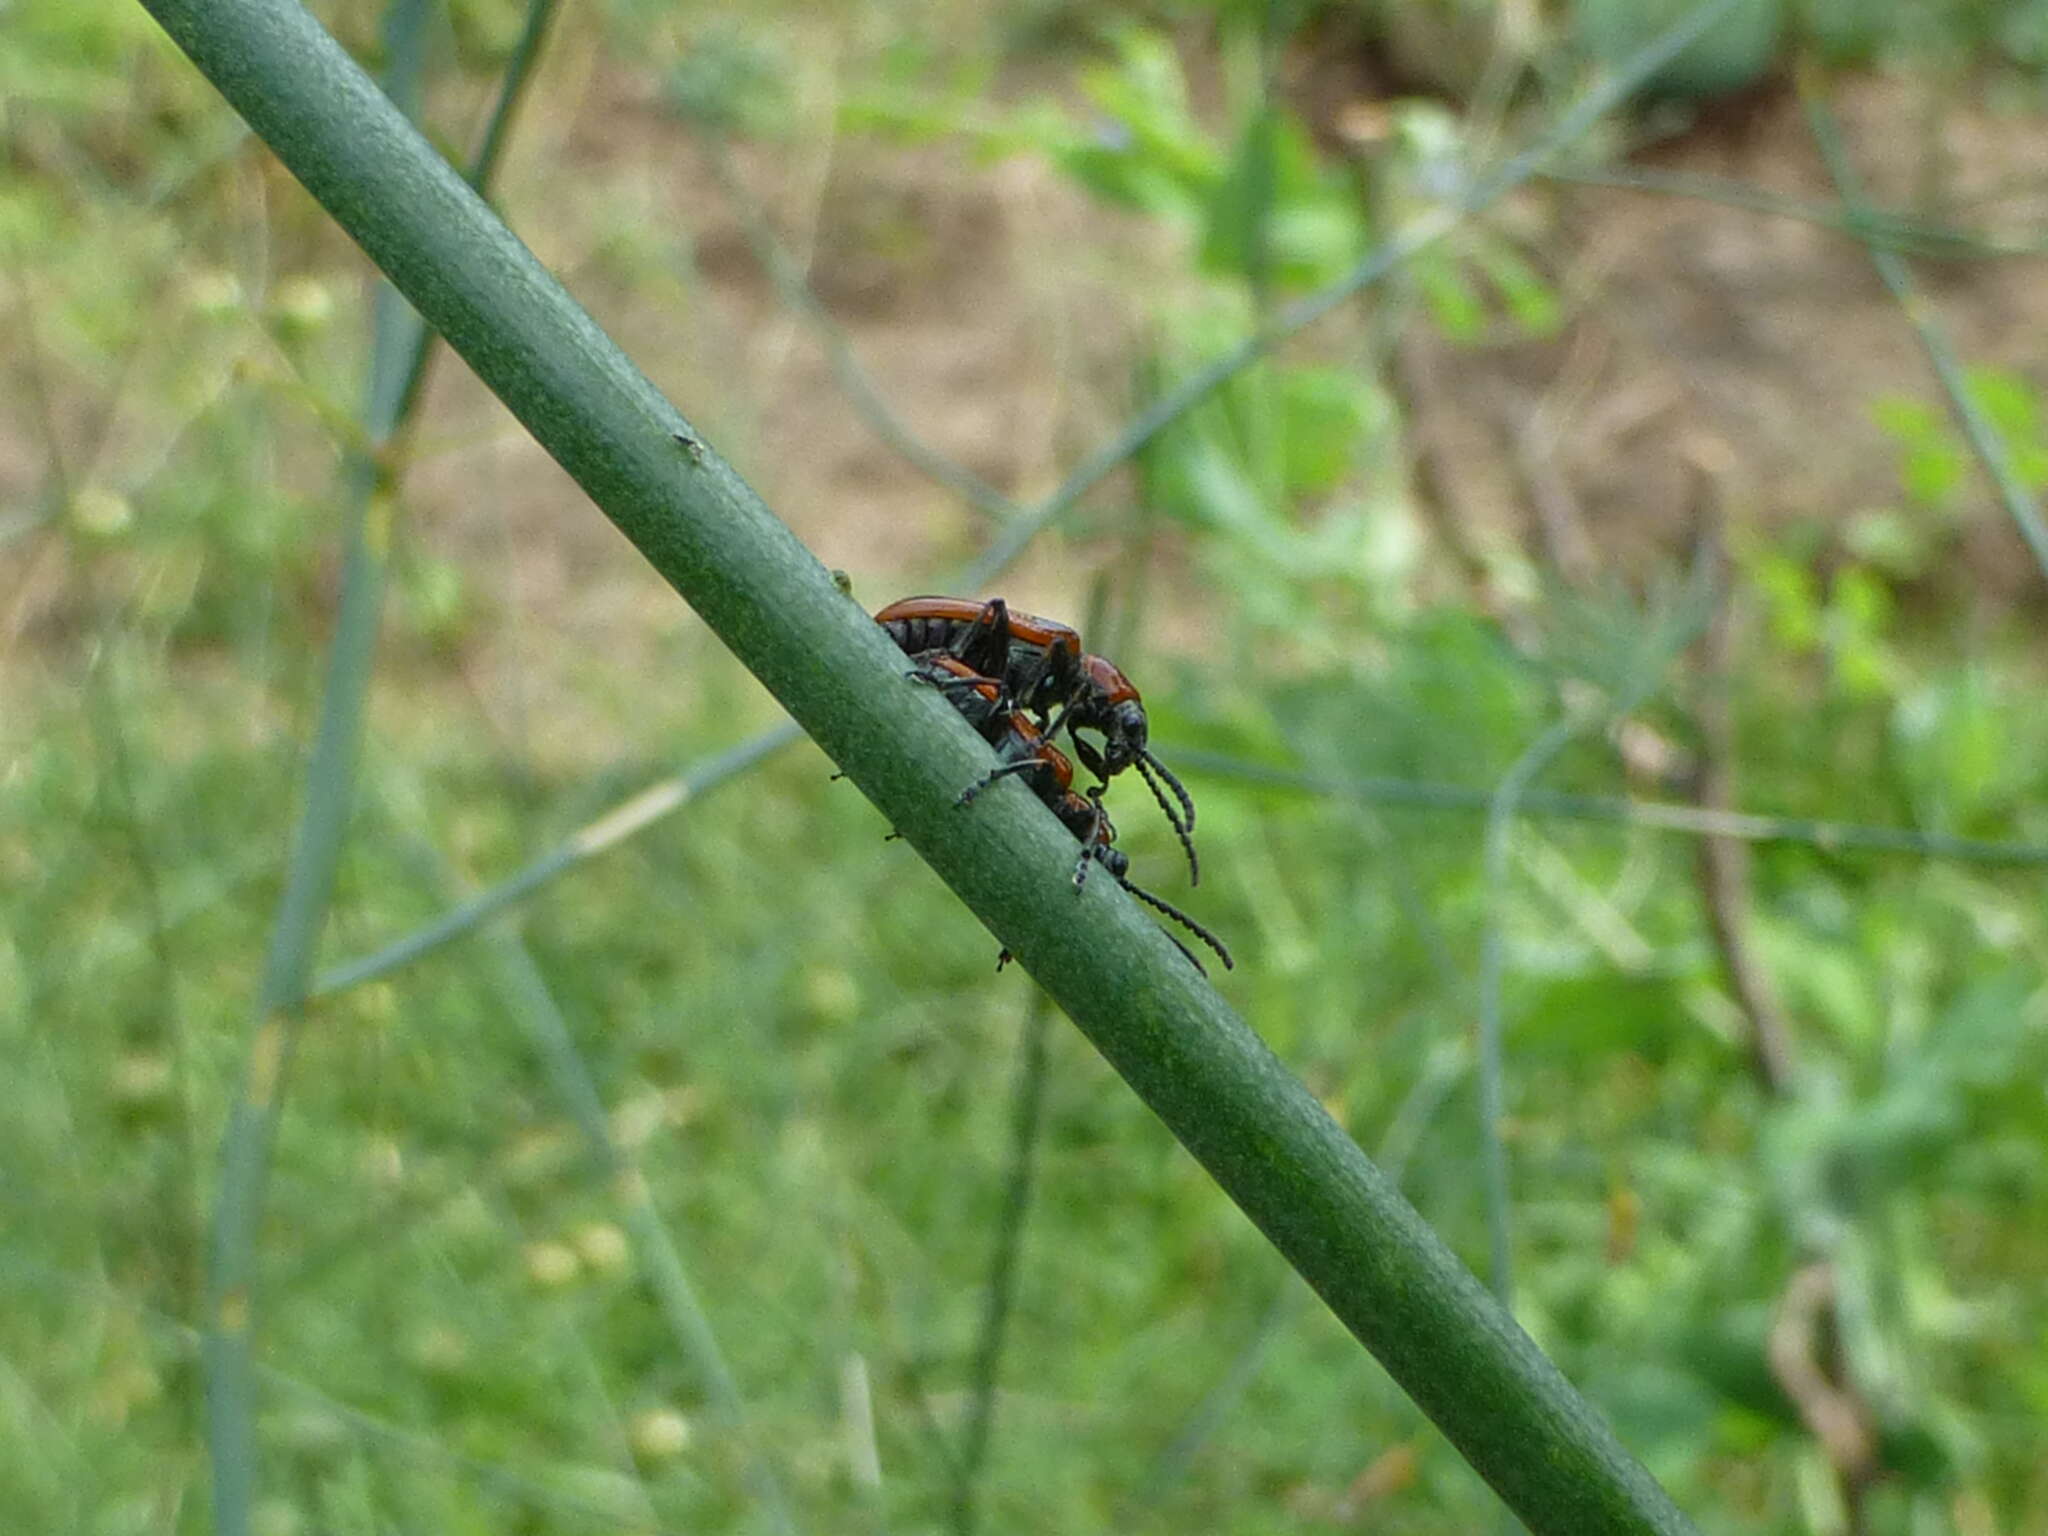 Image of Common asparagus beetle